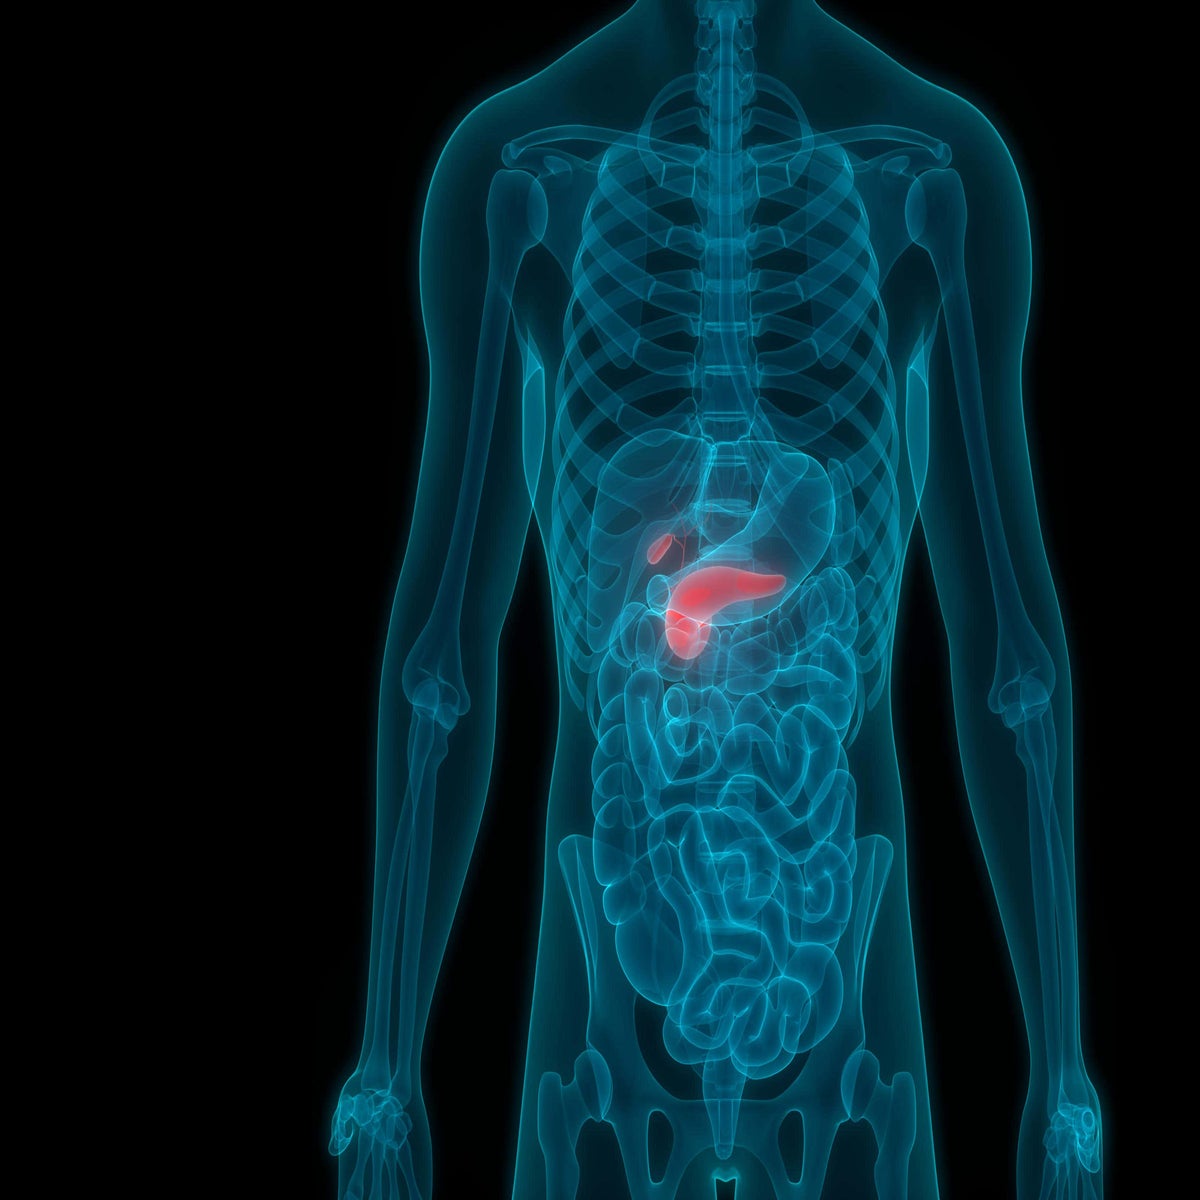 Pancreatic cancer symptoms: 14 signs you are most likely to ignore